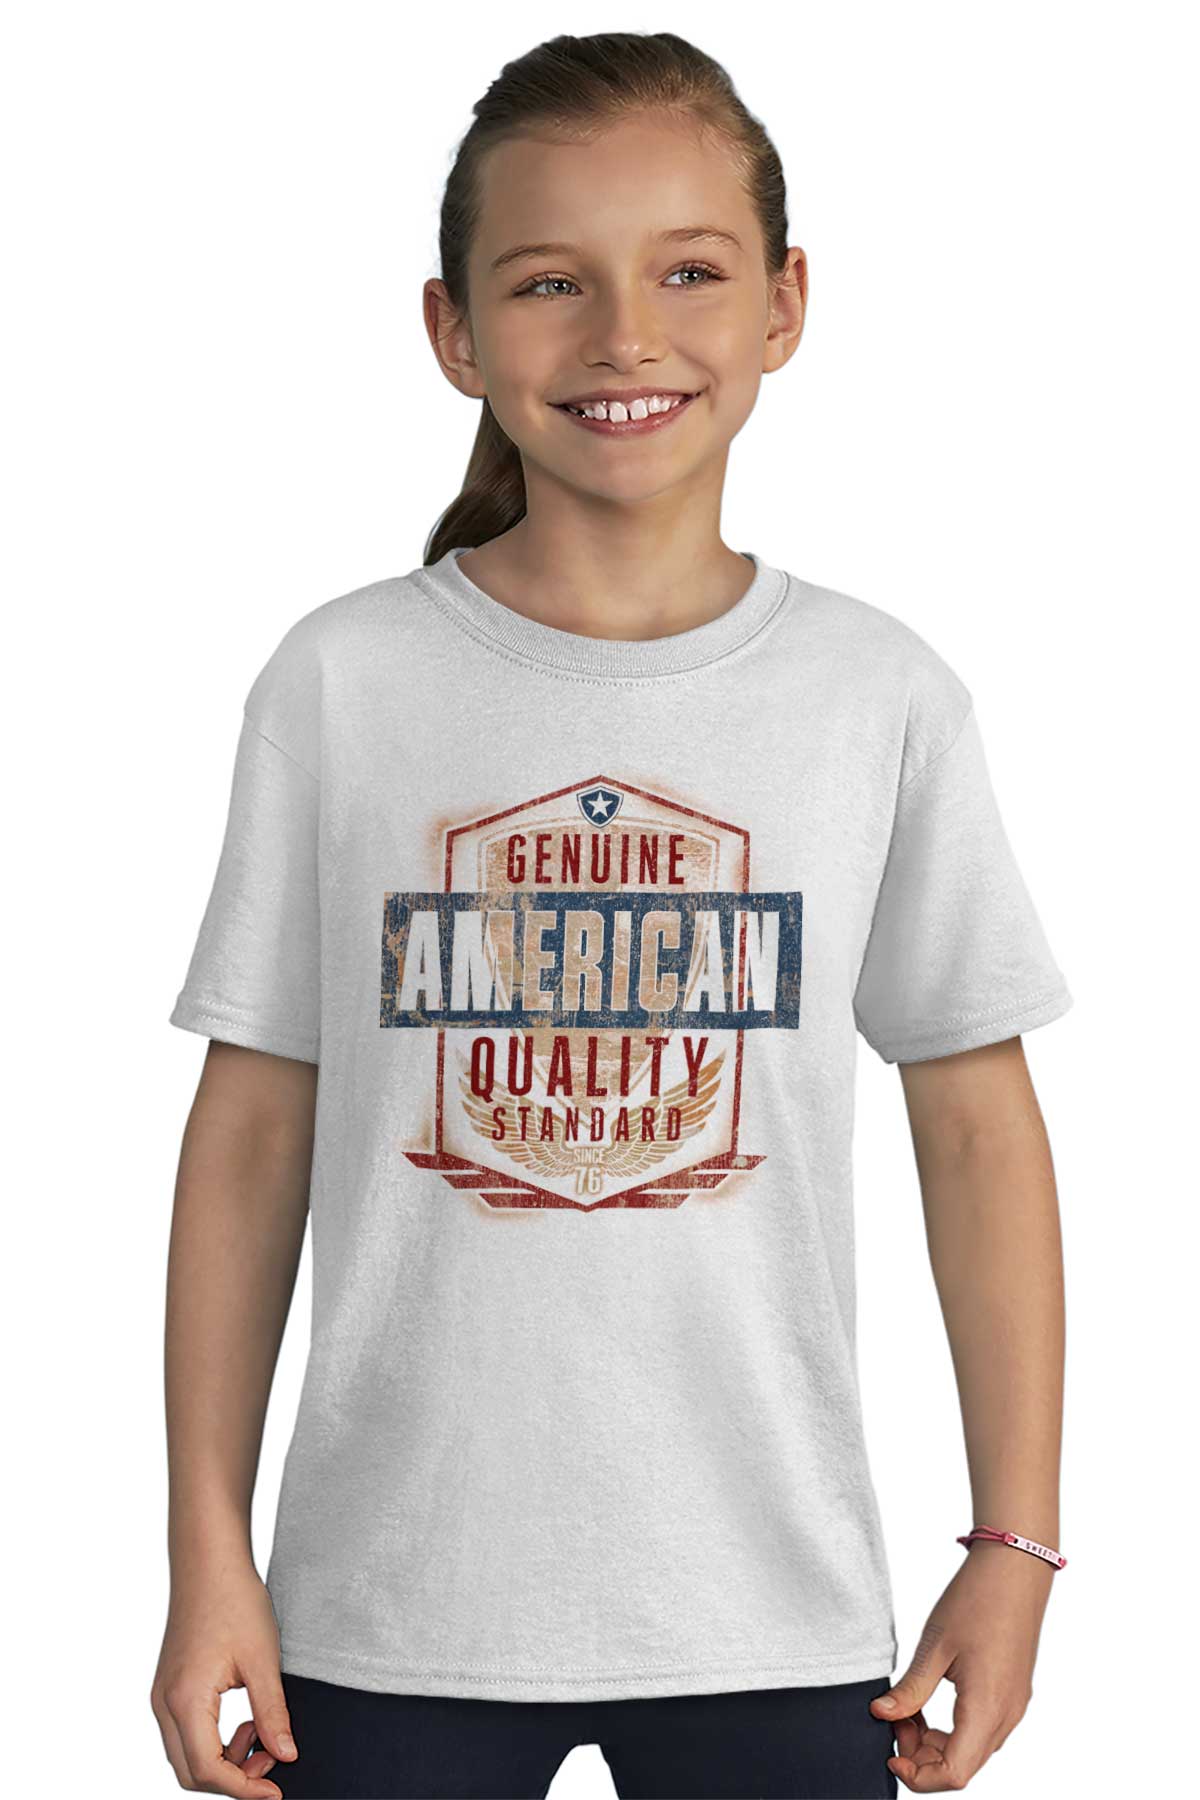 Genuine American Quality Standard USA Proud Unisex Kids Youth Crew T ...